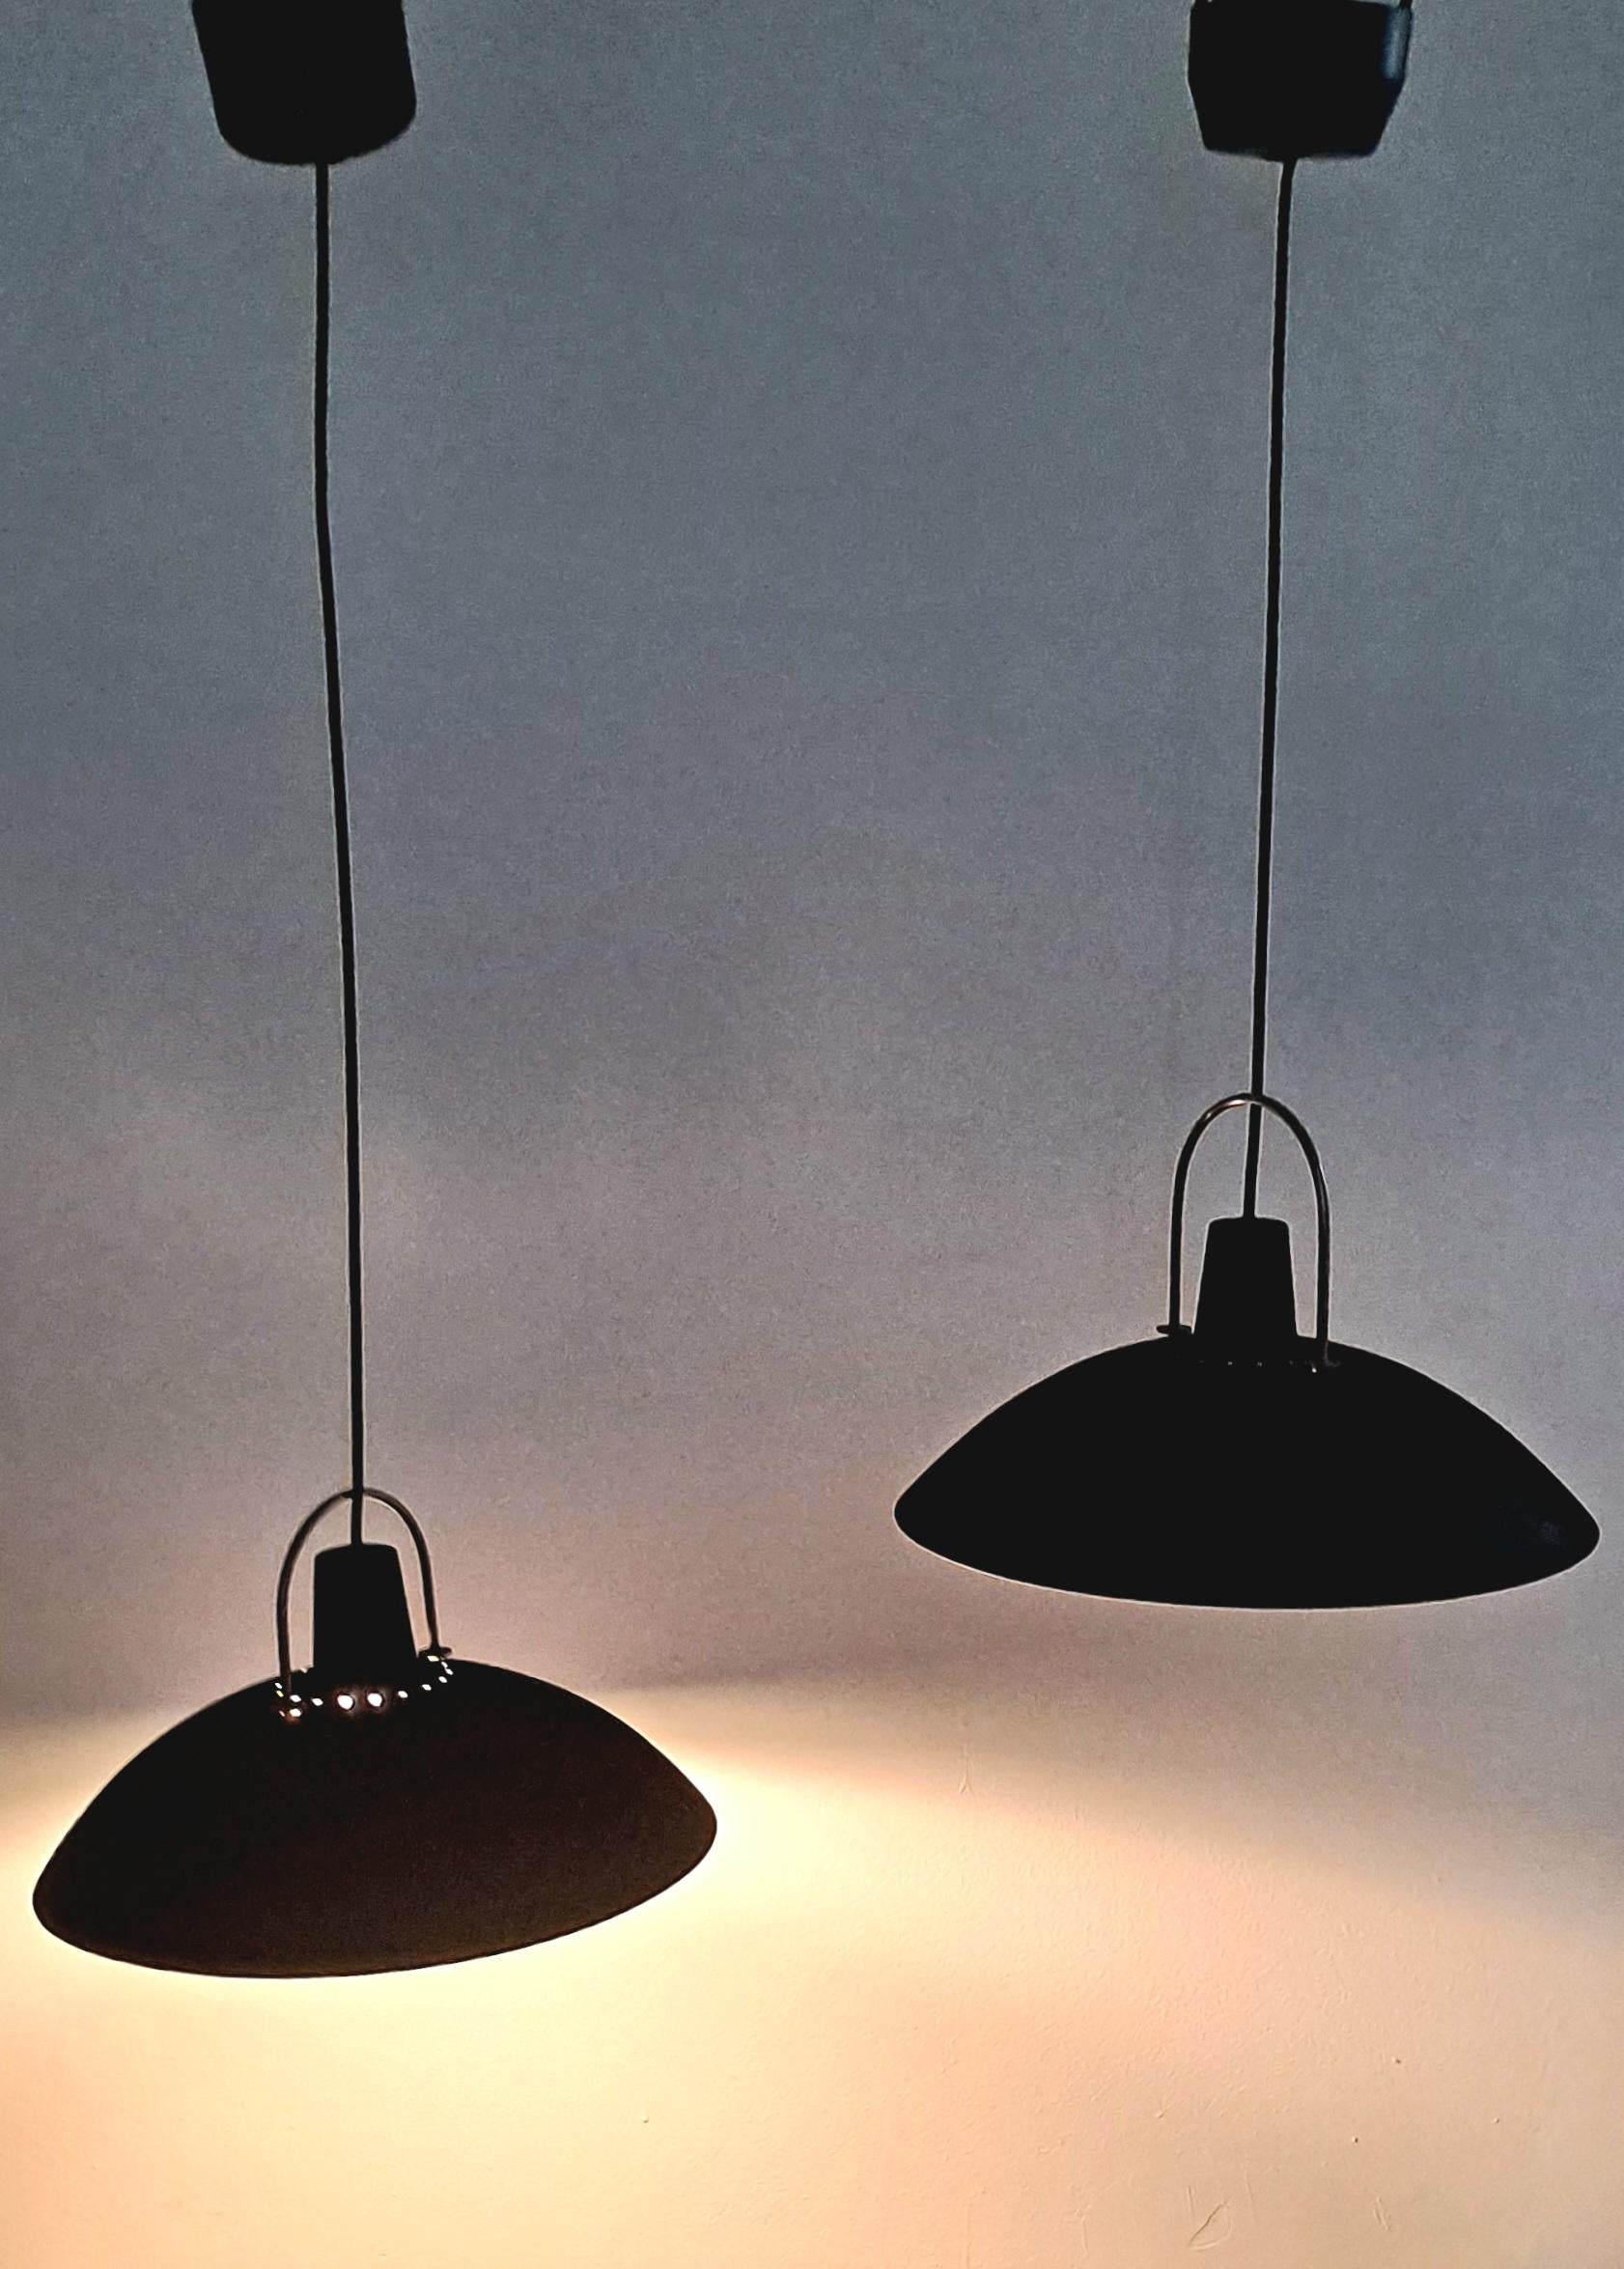 Bauhaus pendants design and made in the Bauhaus school in Germany .We purchase it in Austria .The Pendants are typically futures a simple,geometric shape often used in modern and contemporary design setting particularly in minimalist and industrial